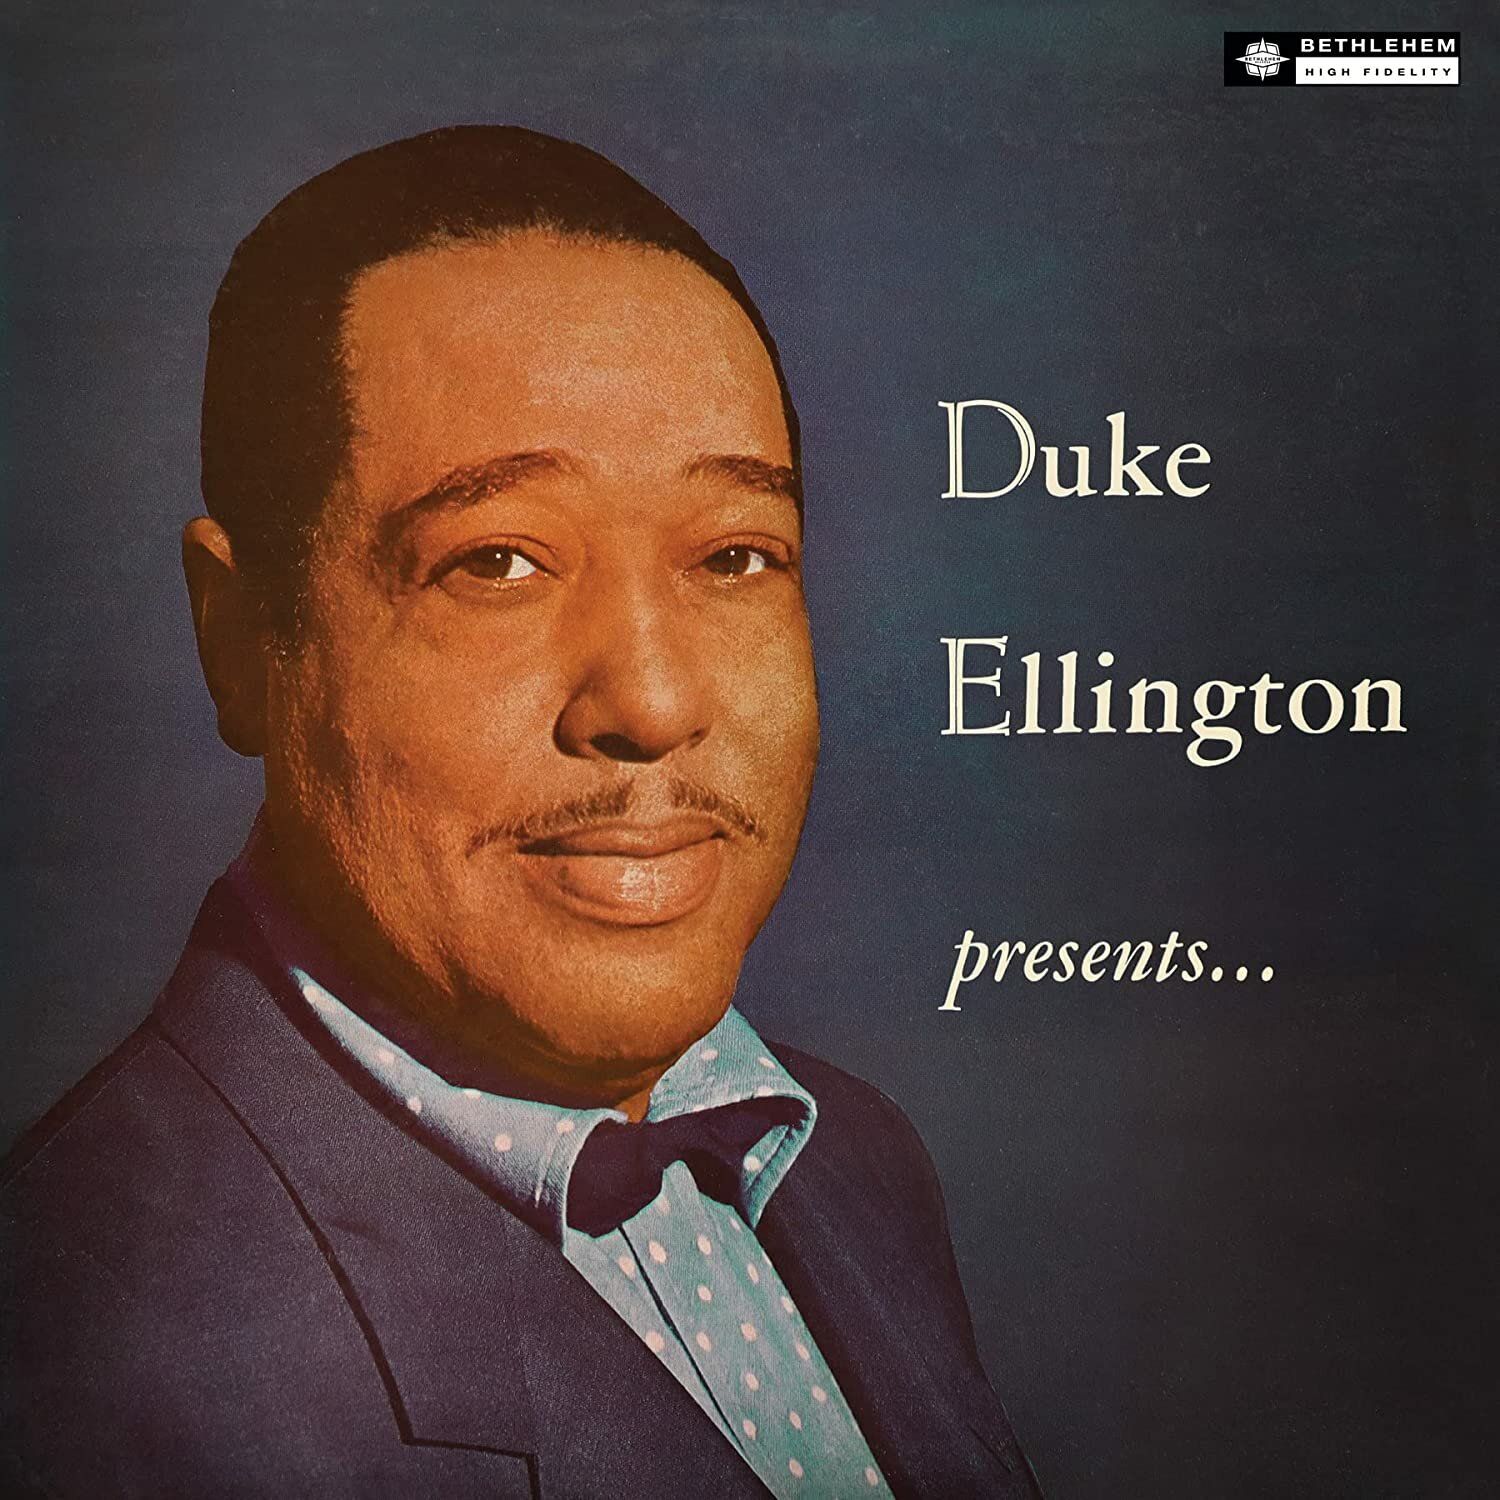 4050538816174, Виниловая пластинка Ellington, Duke, Presents… виниловая пластинка armstrong louis ellington duke together for the first time 0190295961381